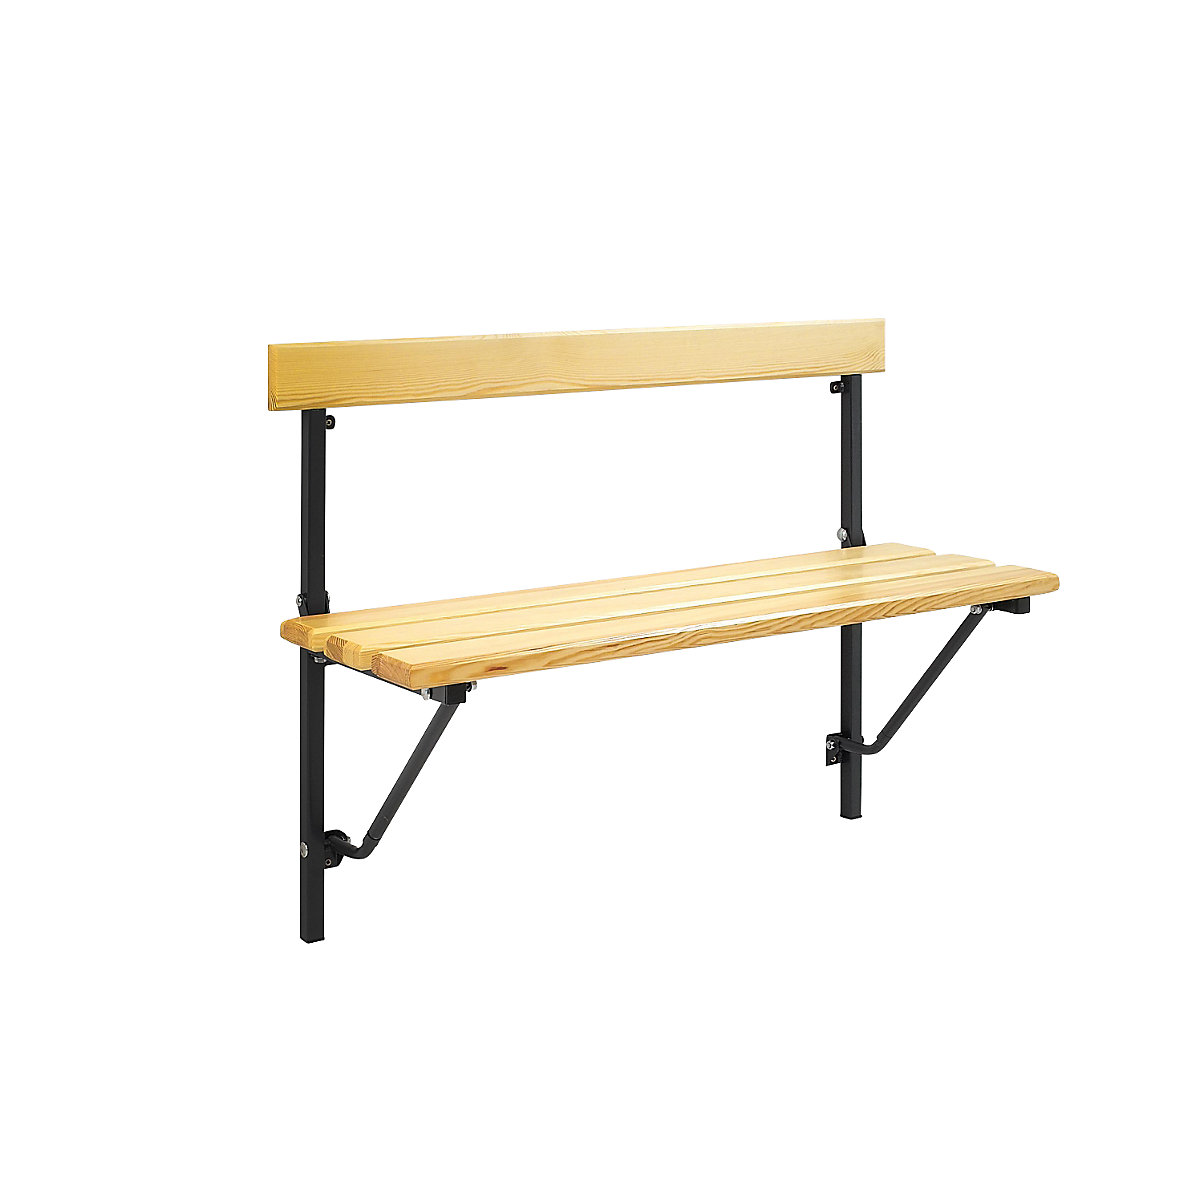 Sypro – Folding wall-mounted bench, folding, fixed length 1200 mm, with wooden slats